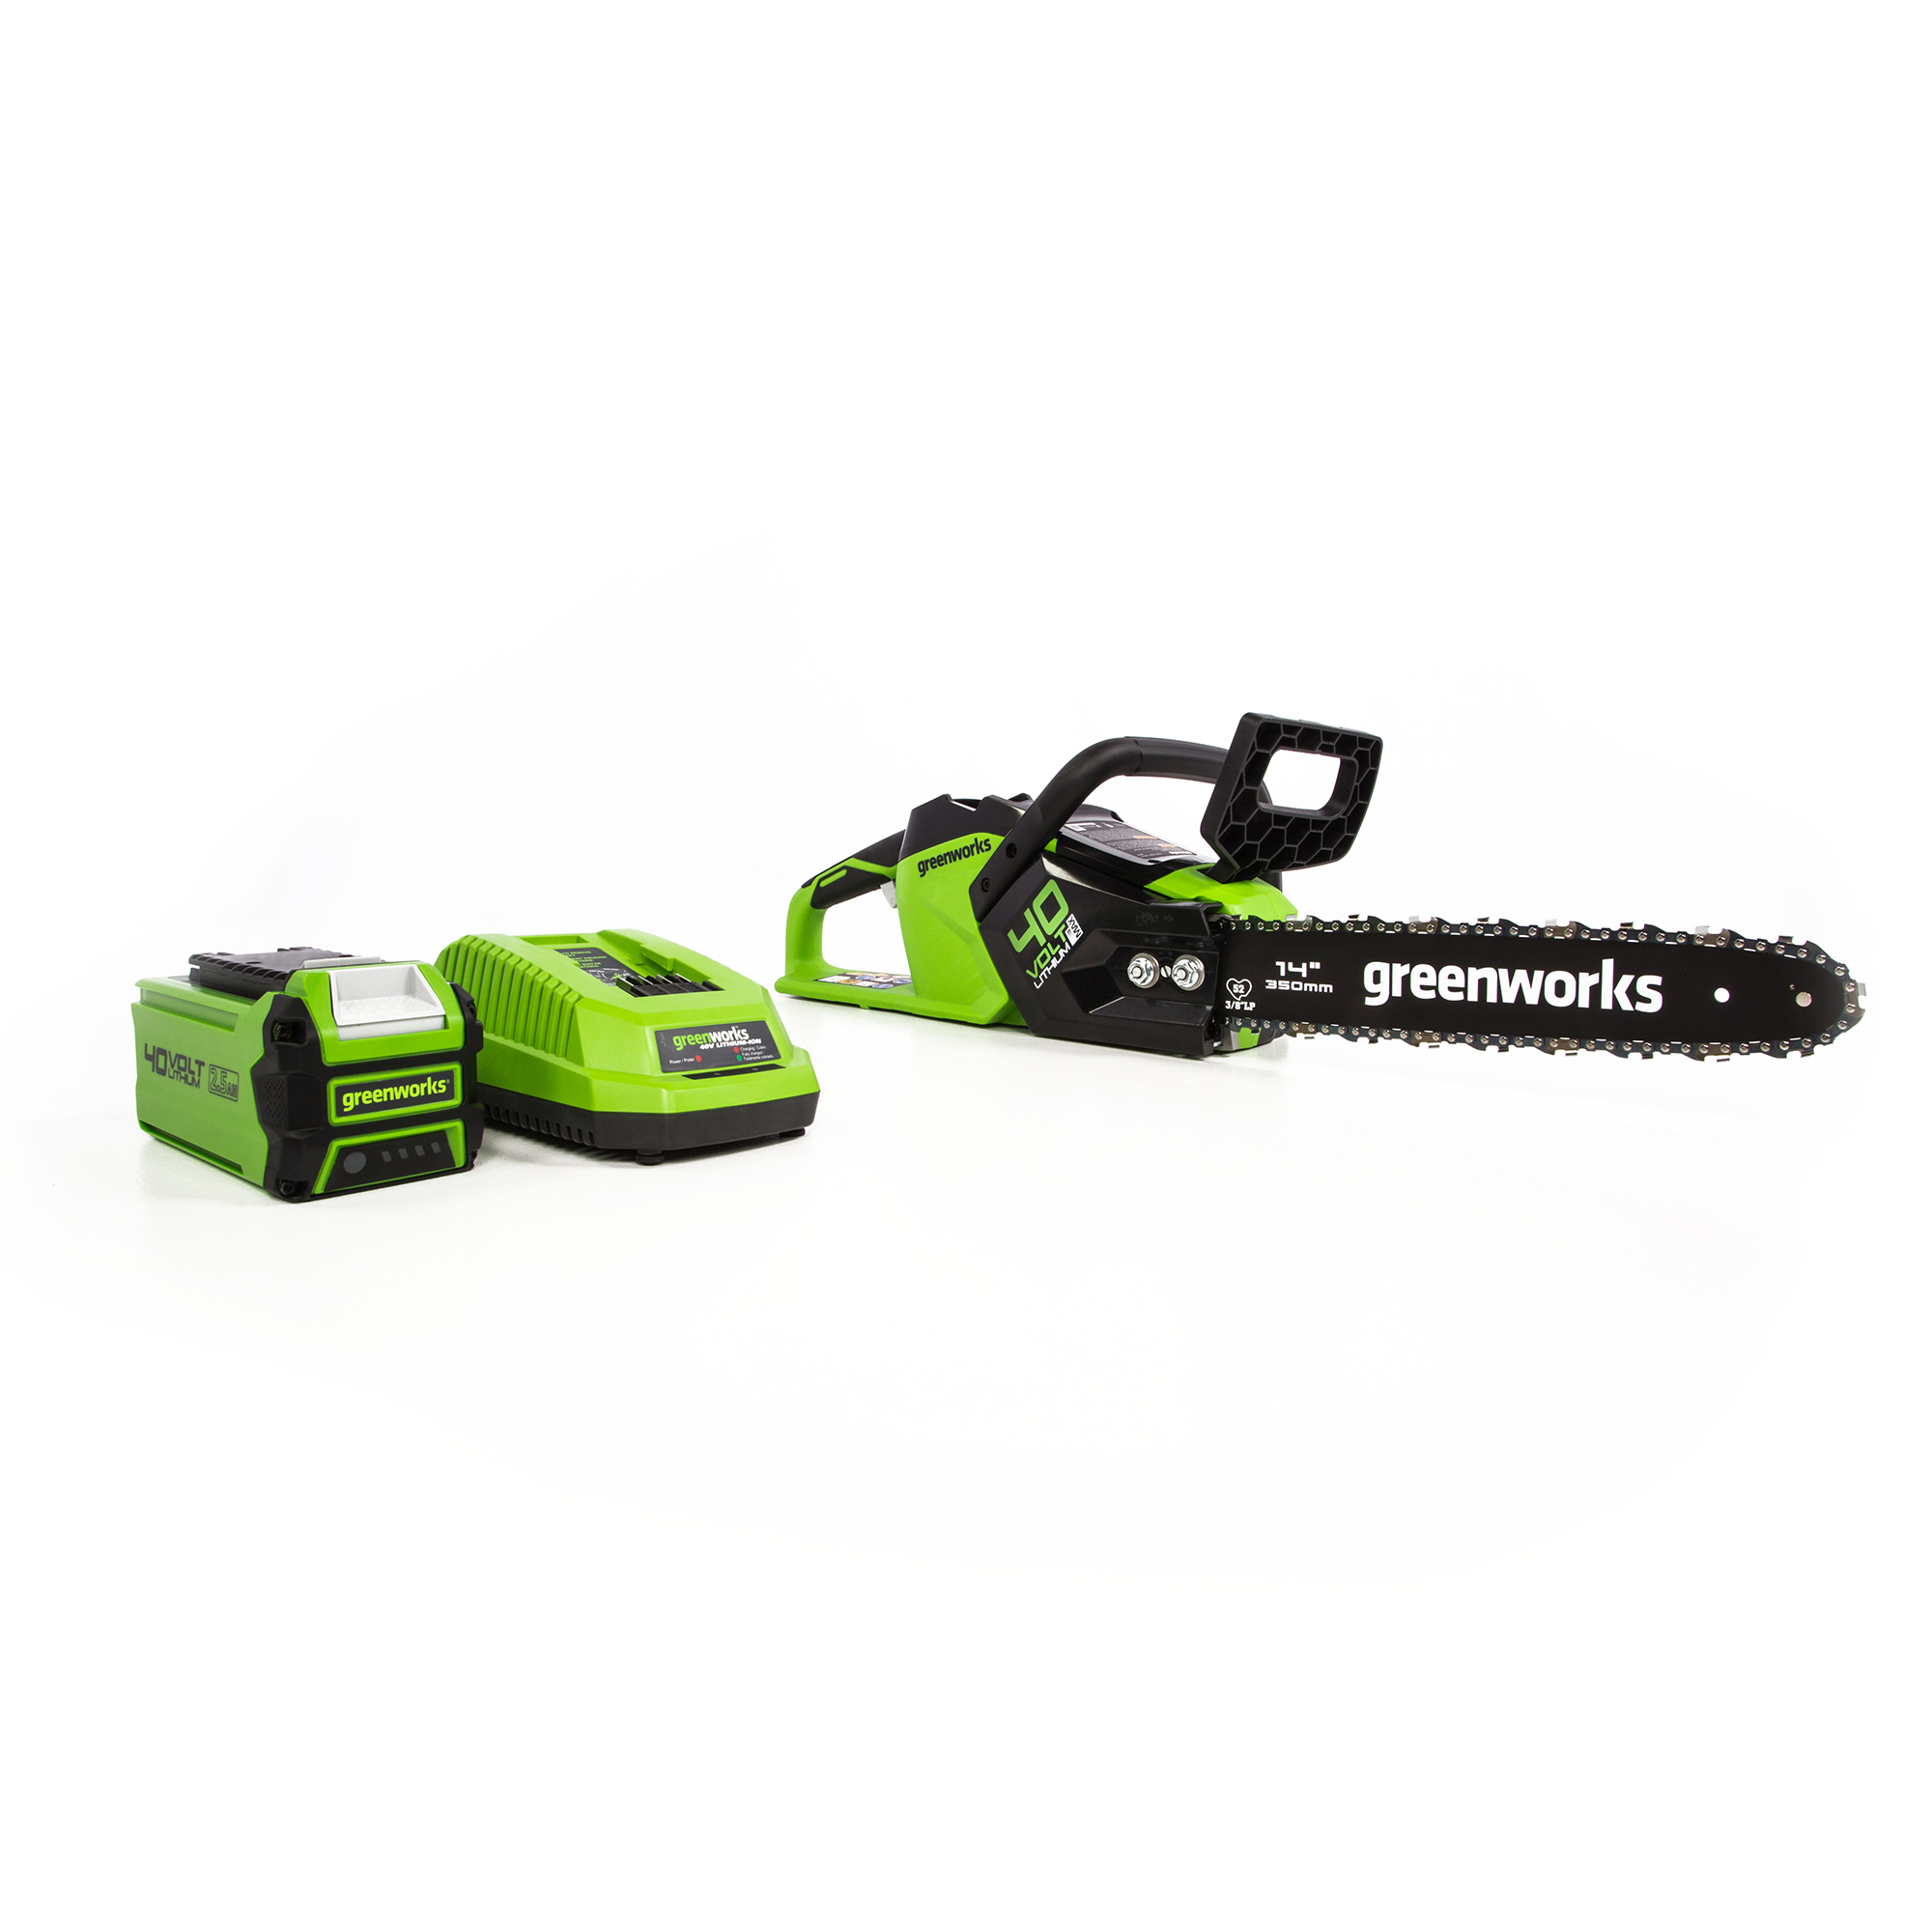 Greenworks 40V 14″ Brushless Chainsaw with 2.5Ah Battery and Charger